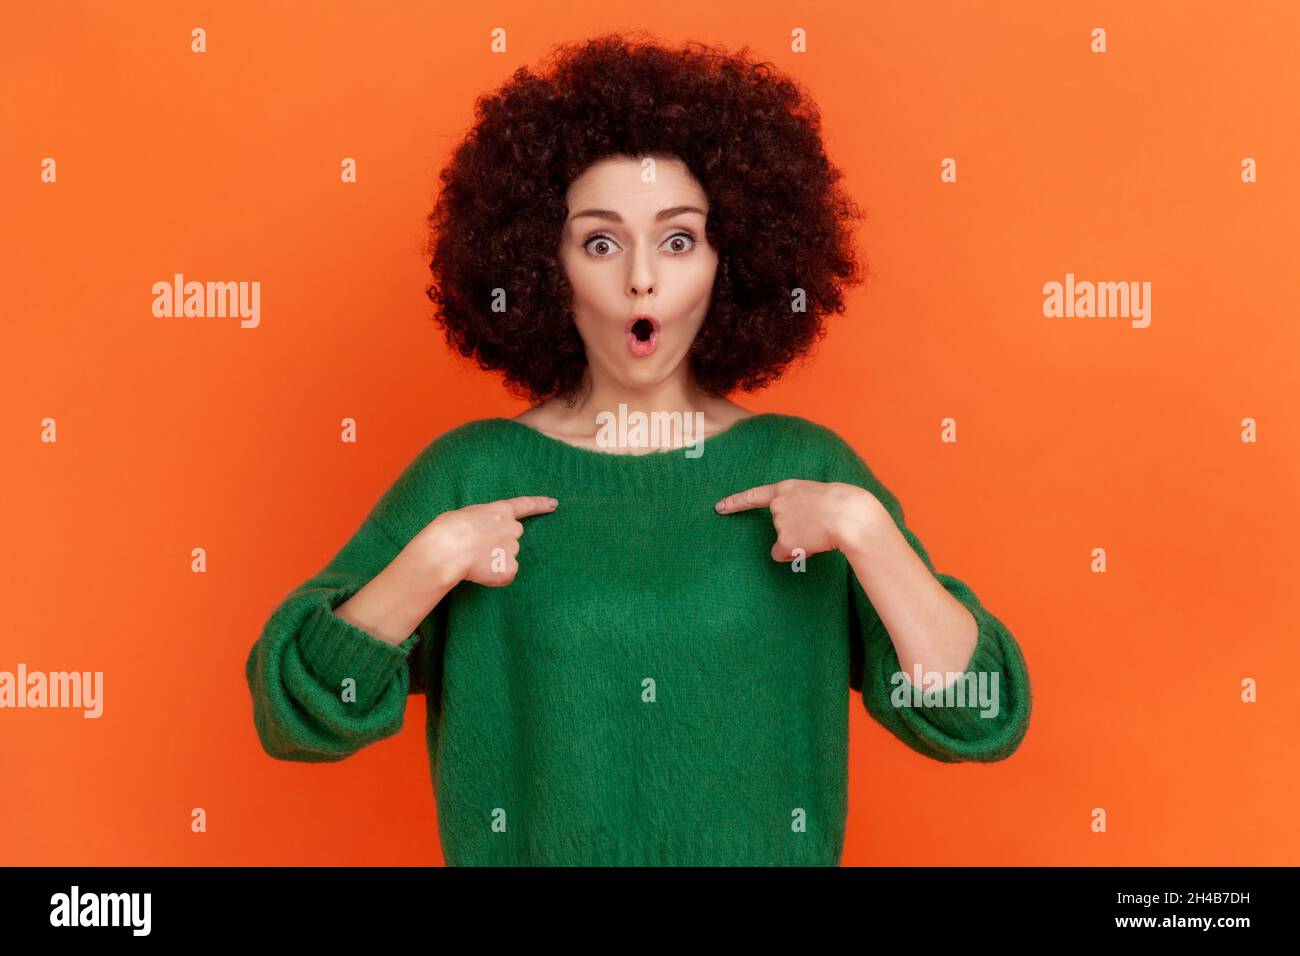 Wow, it is me. Surprised woman with Afro hairstyle in green casual style sweater looking at camera with open mouth, pointing at herself with shock. Indoor studio shot isolated on orange background Stock Photo